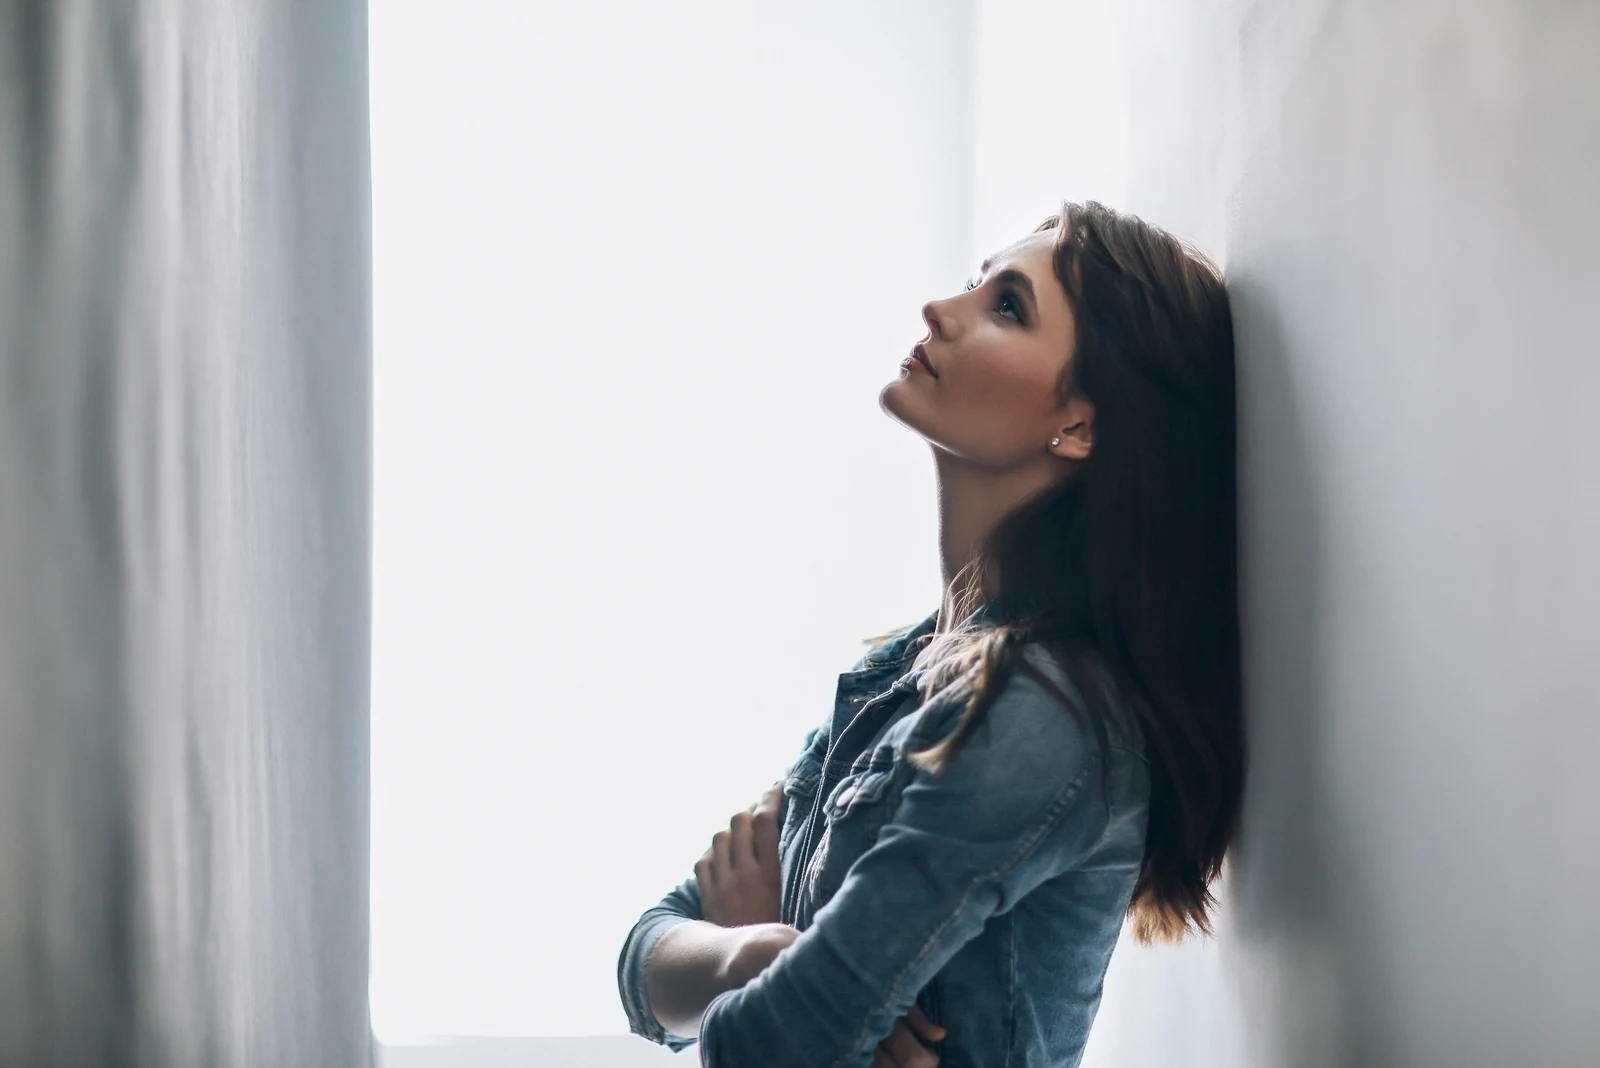 the woman stands pensively leaning against the wall